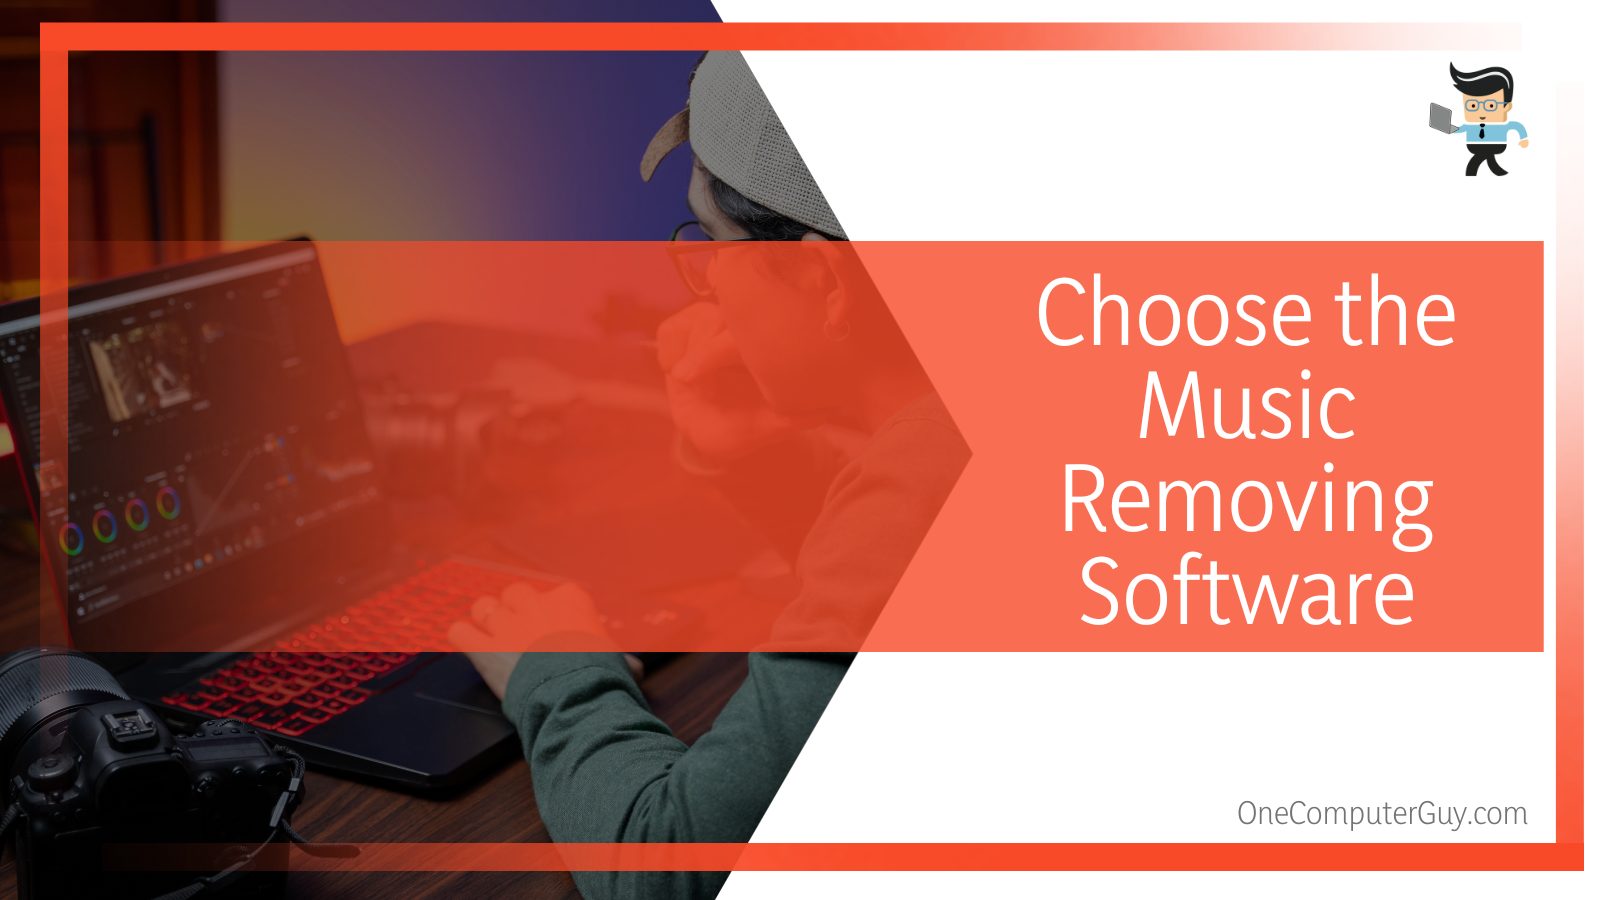 Choose the Music Removing Software